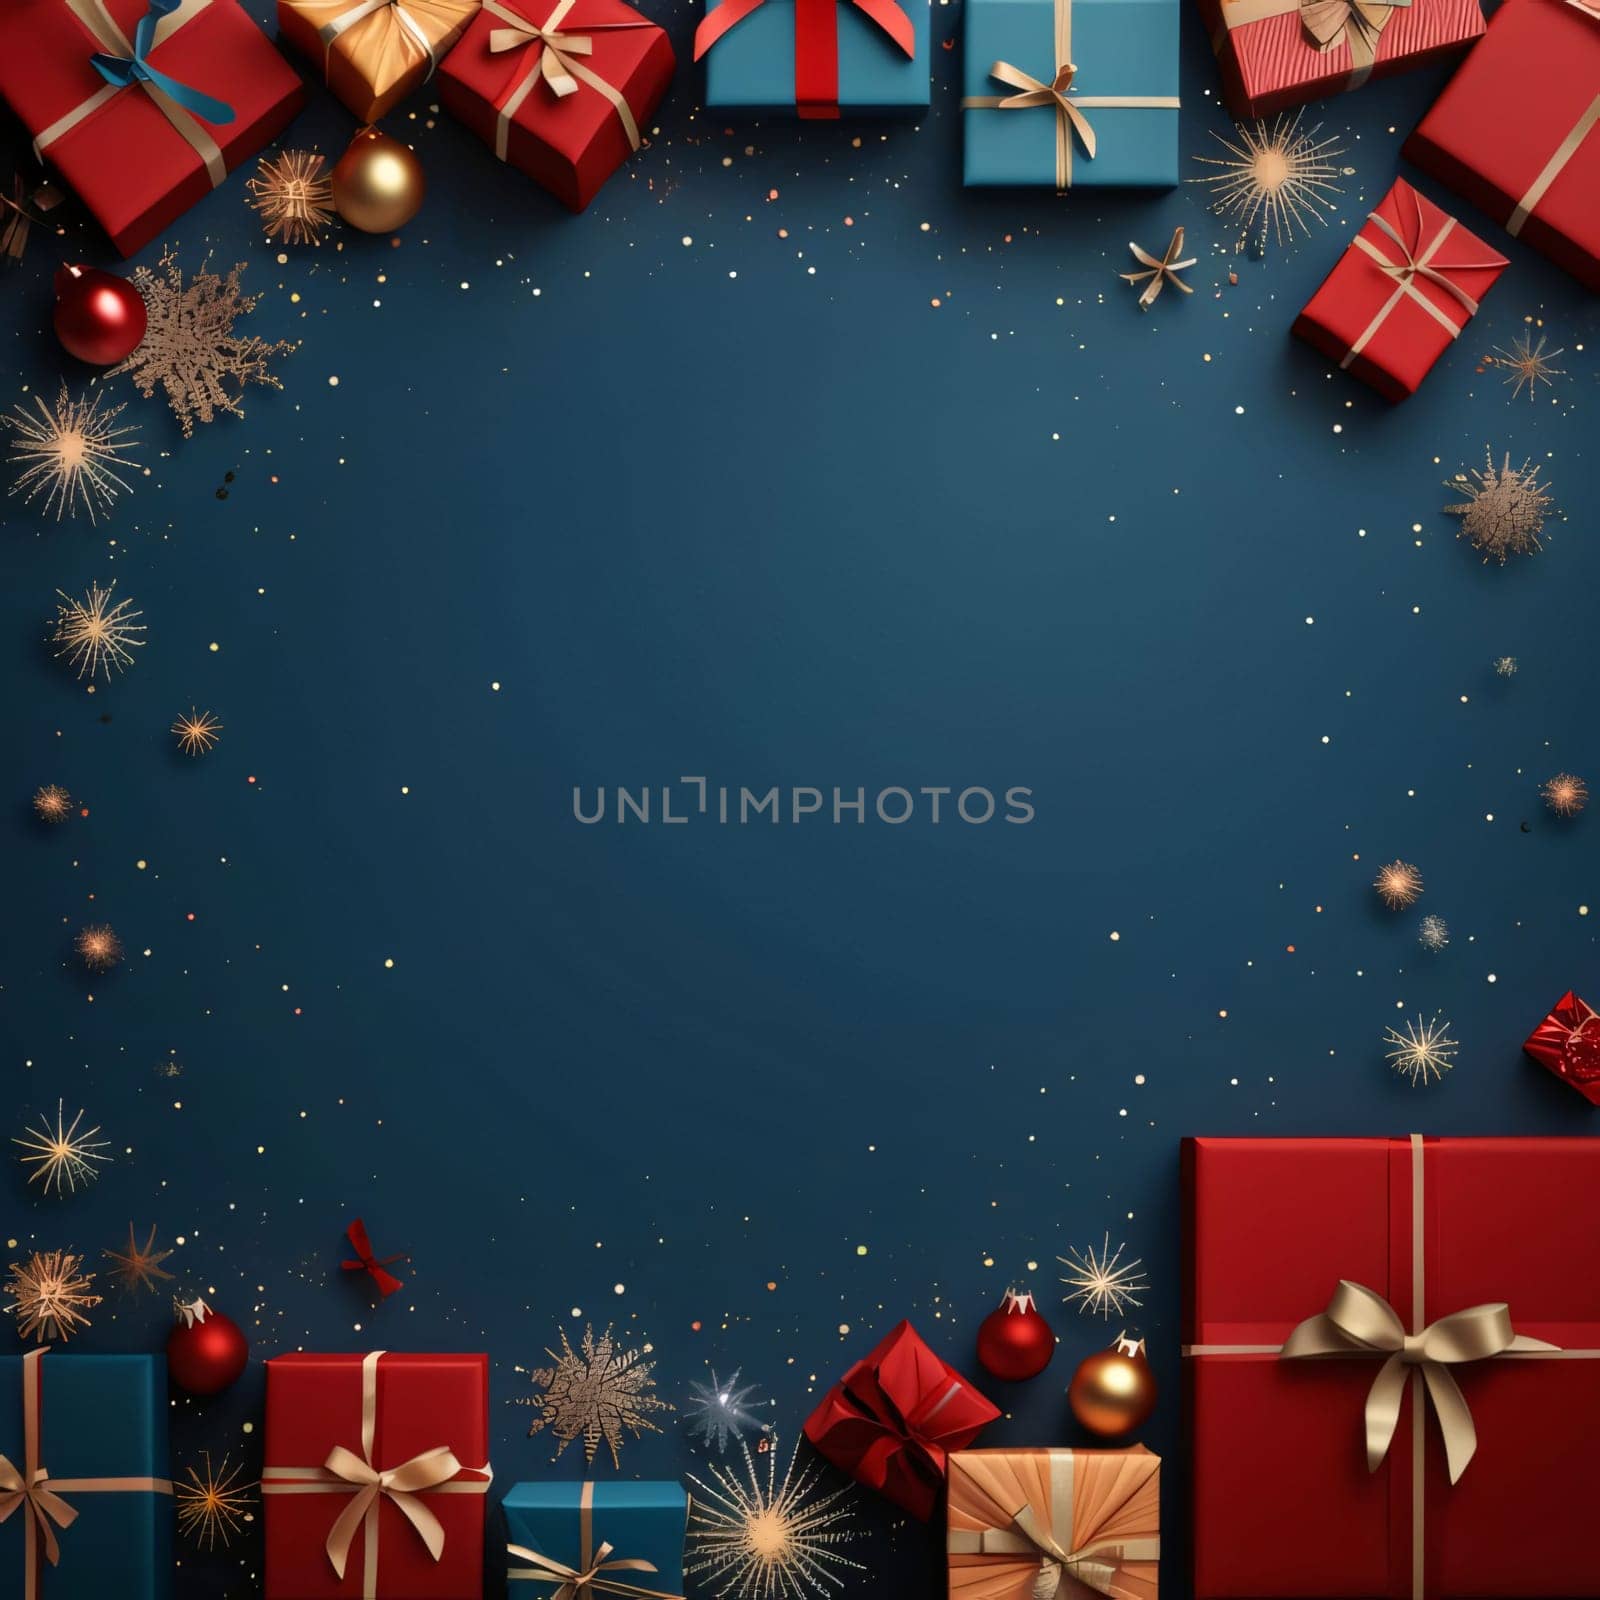 Dark background around red, blue gifts for gold bows, confetti, gold baubles and stars.Valentine's Day banner with space for your own content. Heart as a symbol of affection and love.